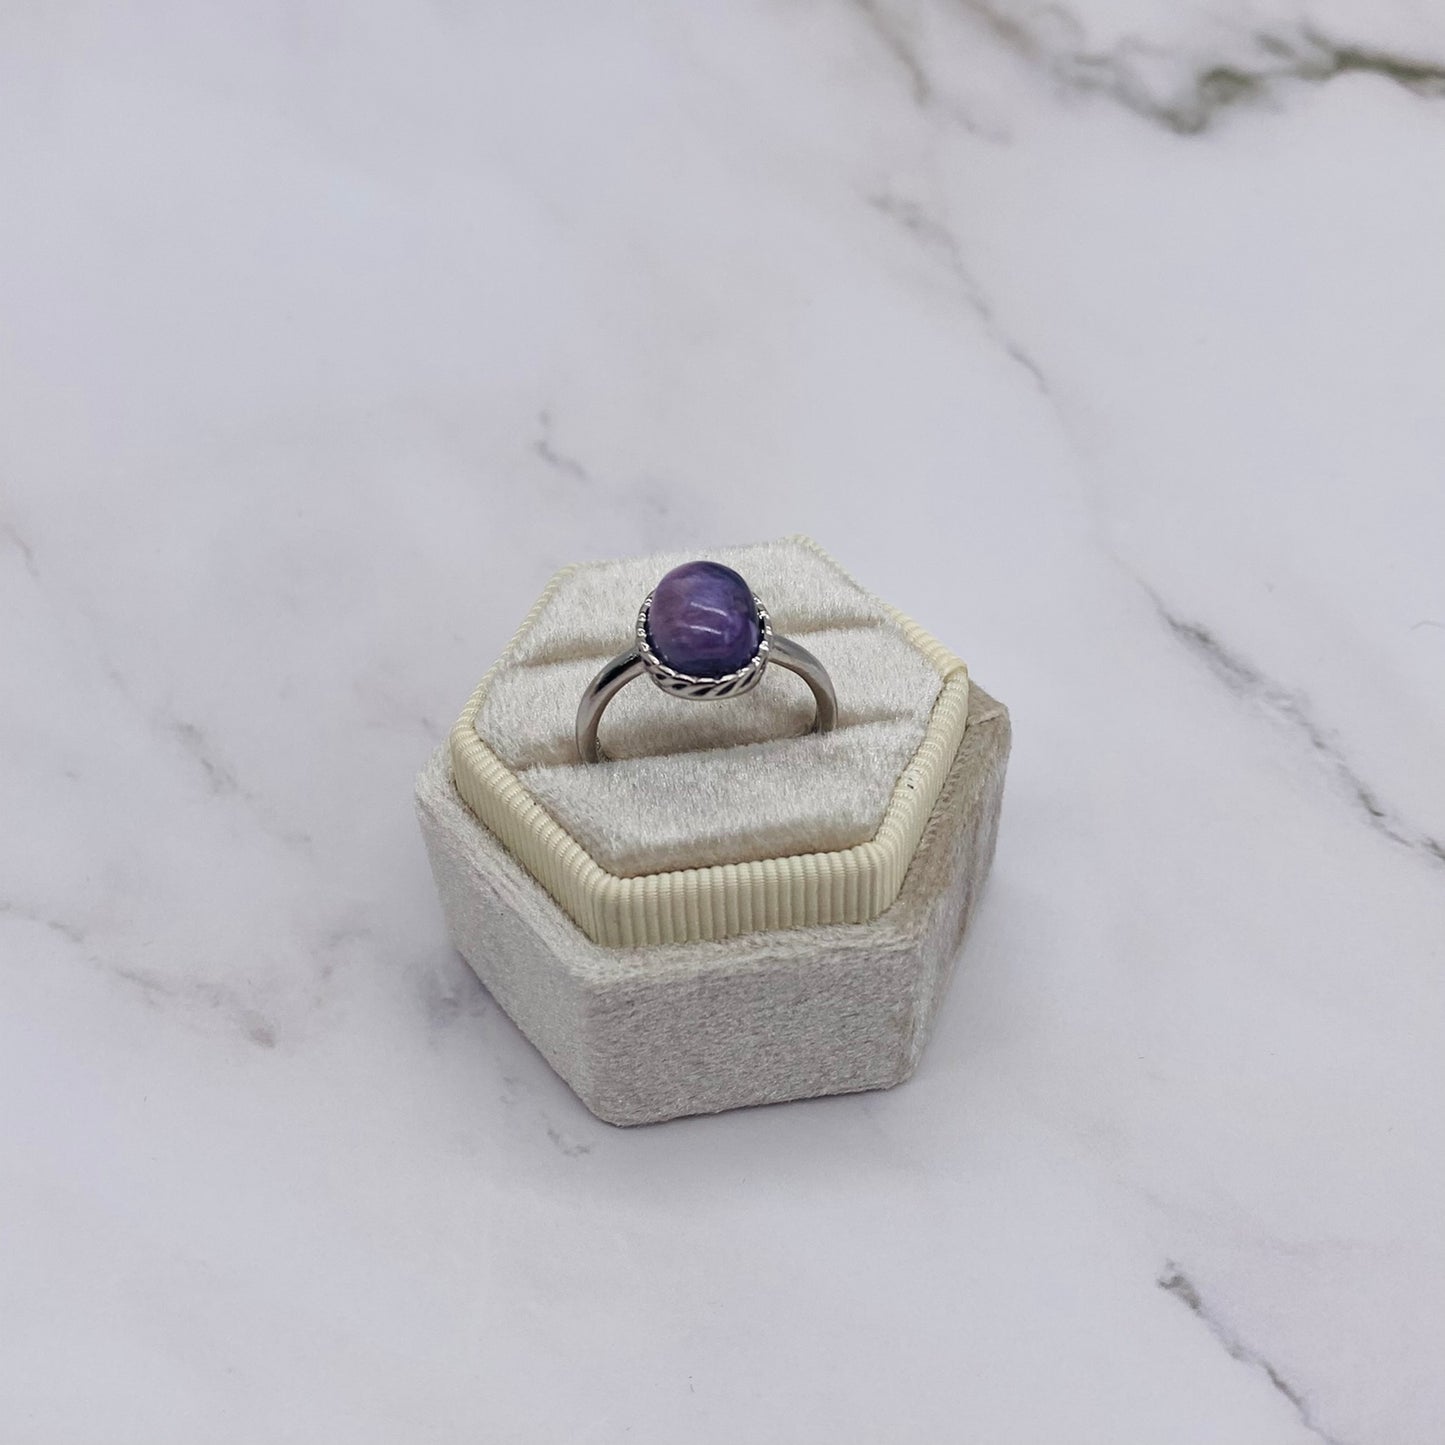 Charoite Crystal Ring, Adjustable Gemstone Ring, Minimalist Ring, Bohemian Rings, Handmade Jewelry, Gift For Her, Boho Style, Adjustable